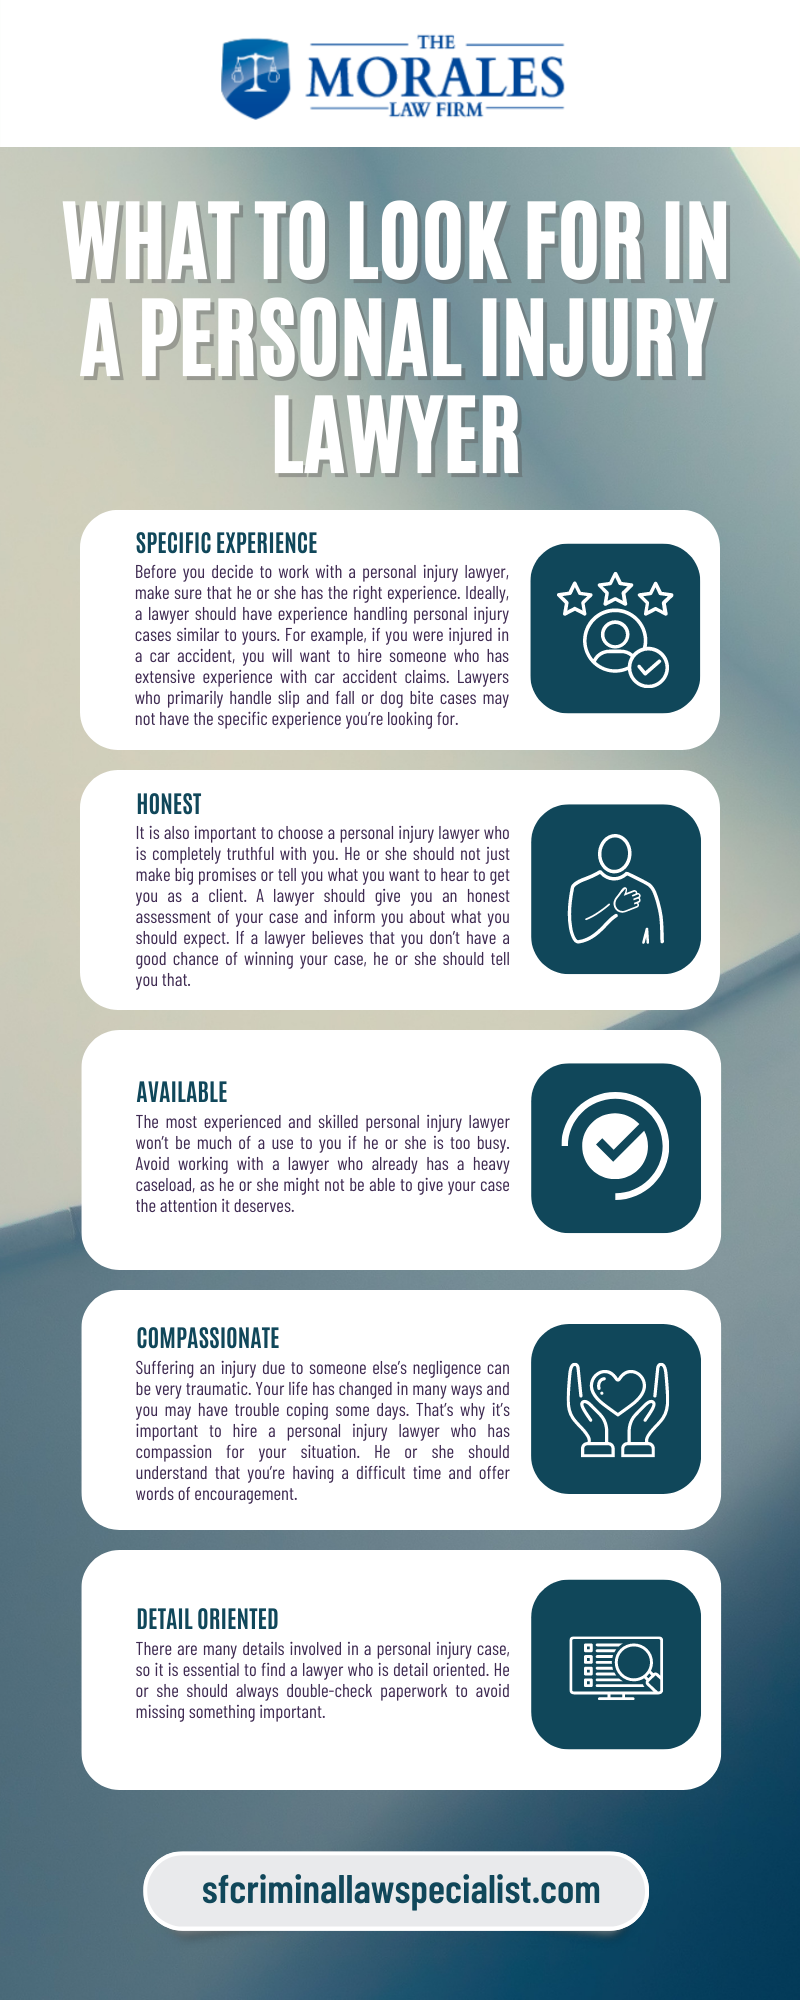 What To Look For In A Personal Injury Lawyer Infographic